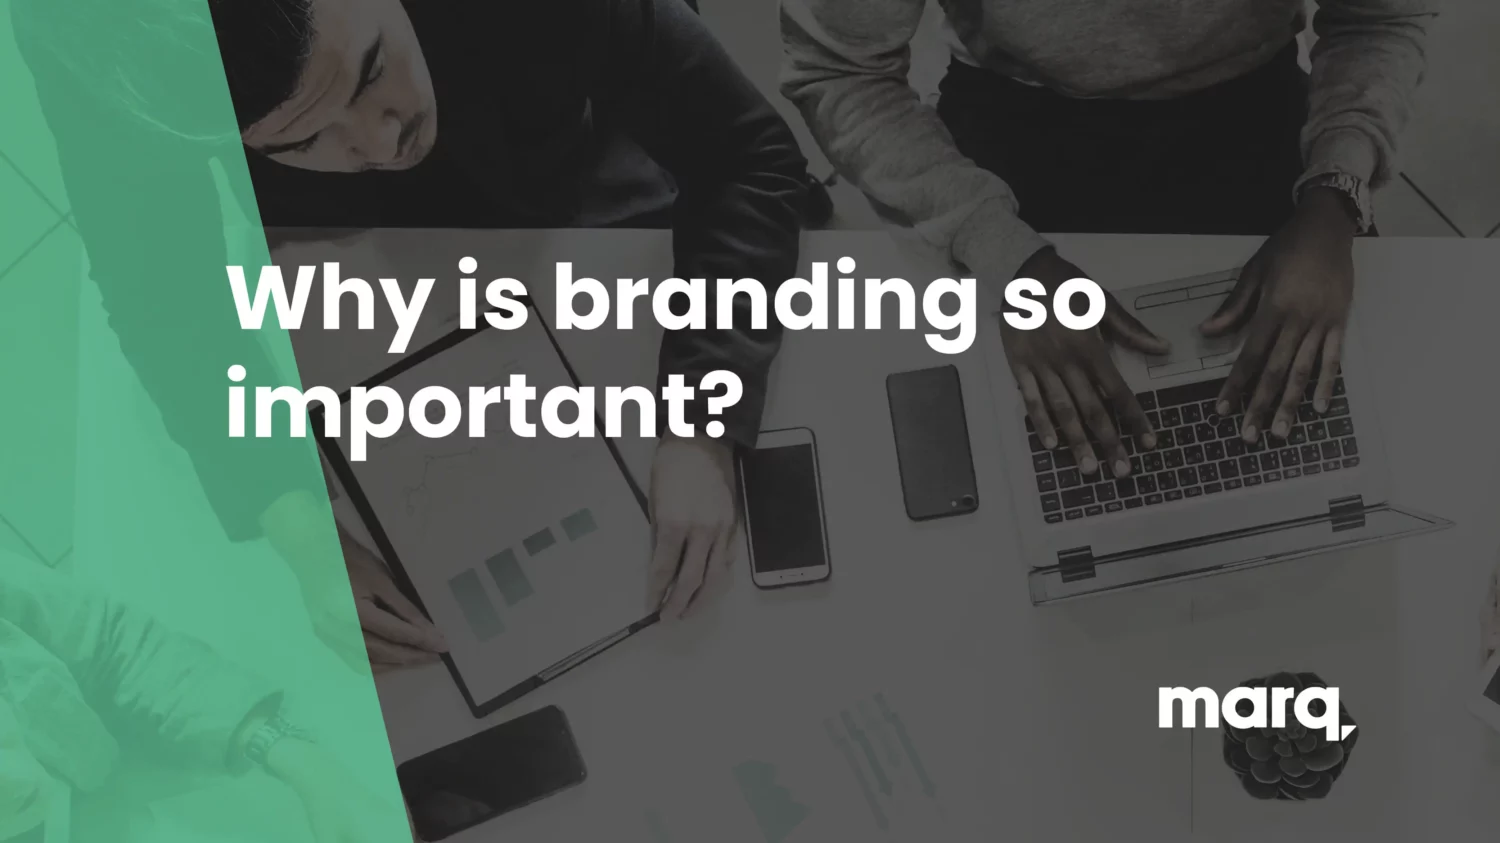 why is branding important